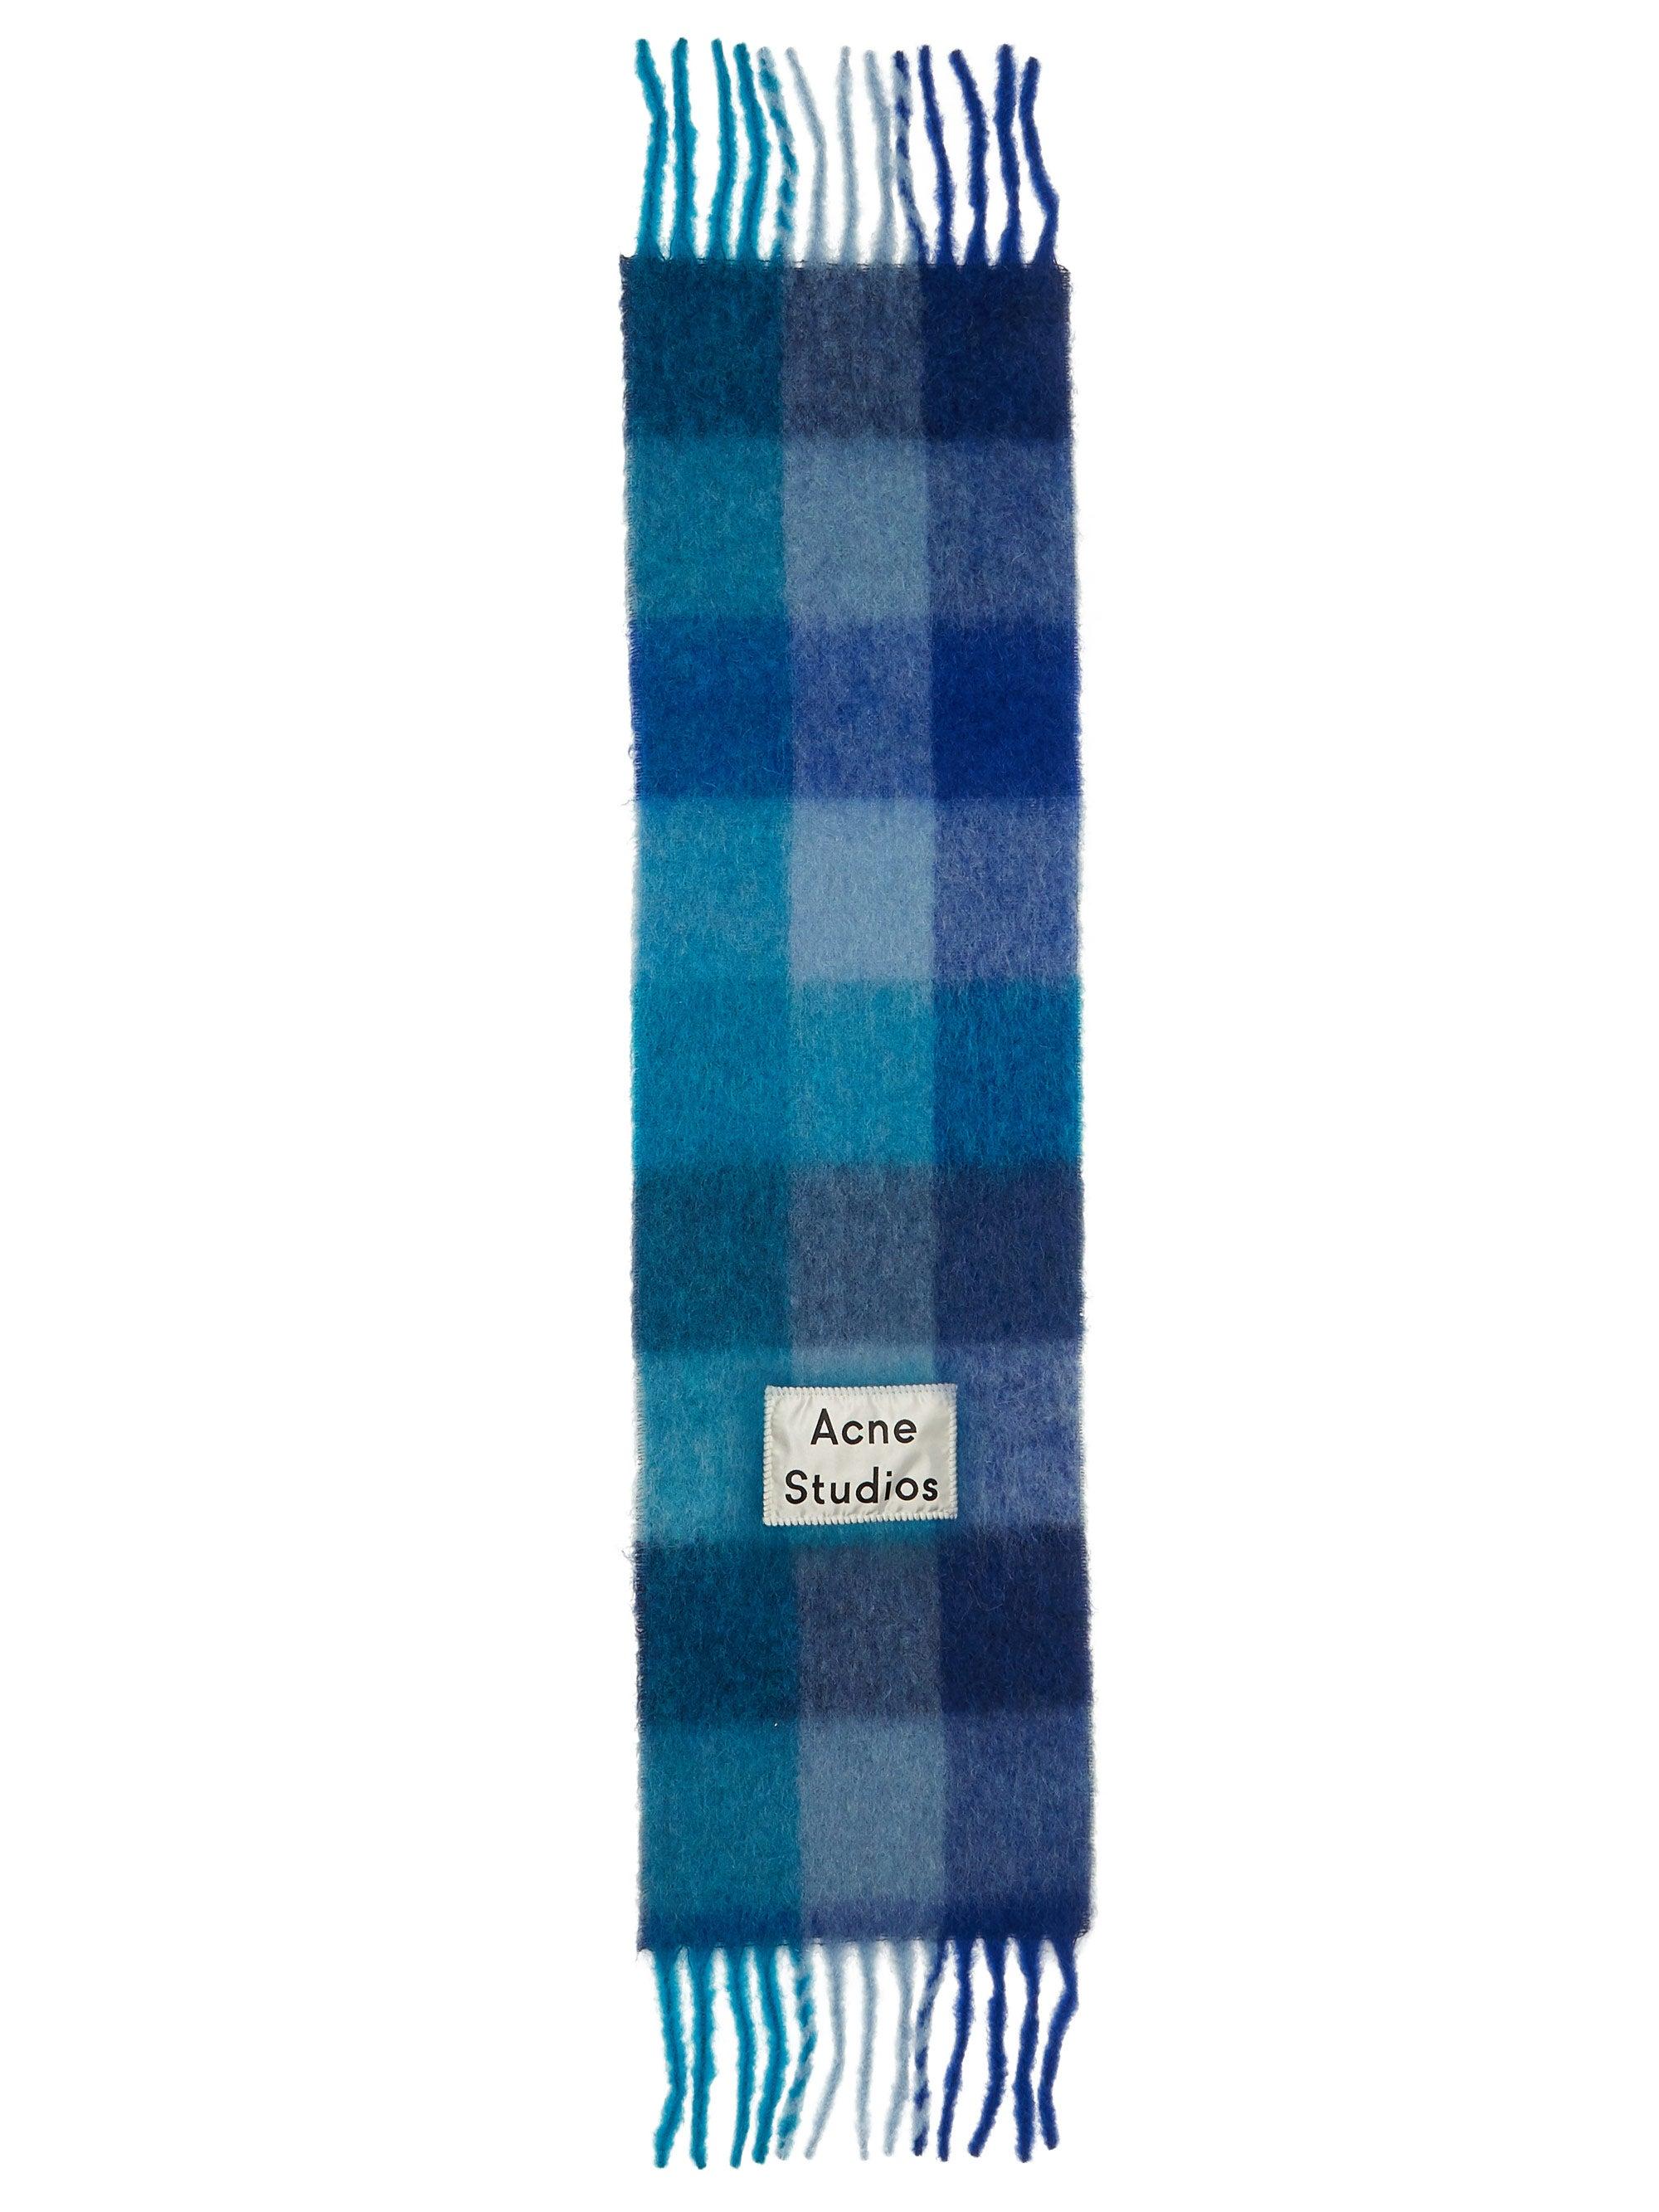 Acne Studios Multi Check Scarf turquoise/navy in Blue | Lyst